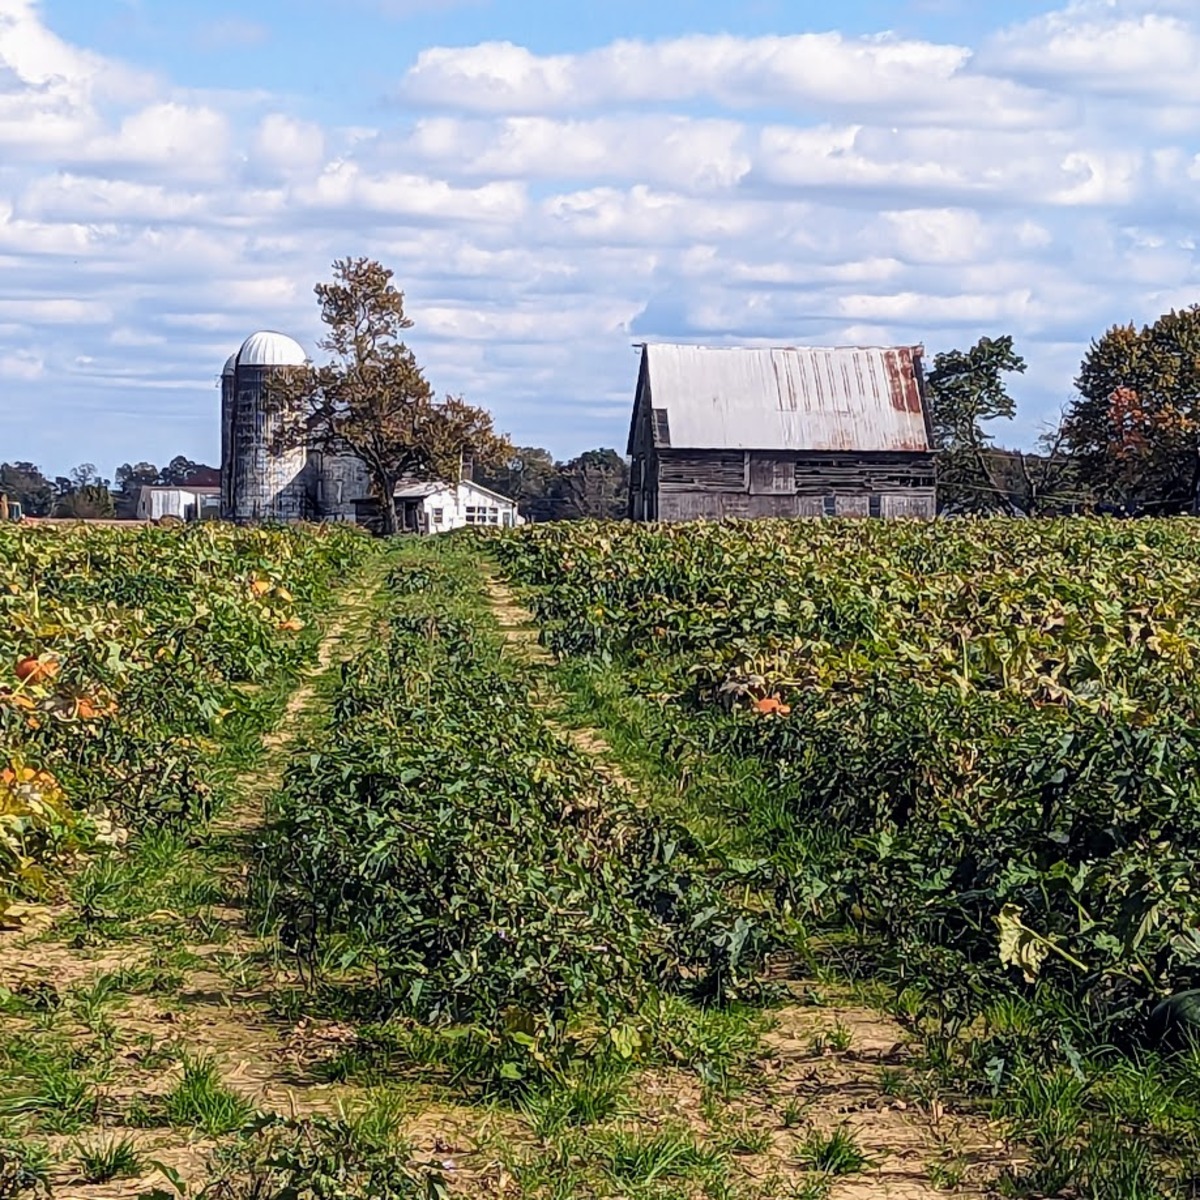 An old barn in the distance, a large pumpkin patch in the foreground - but you can only see one or two of them.